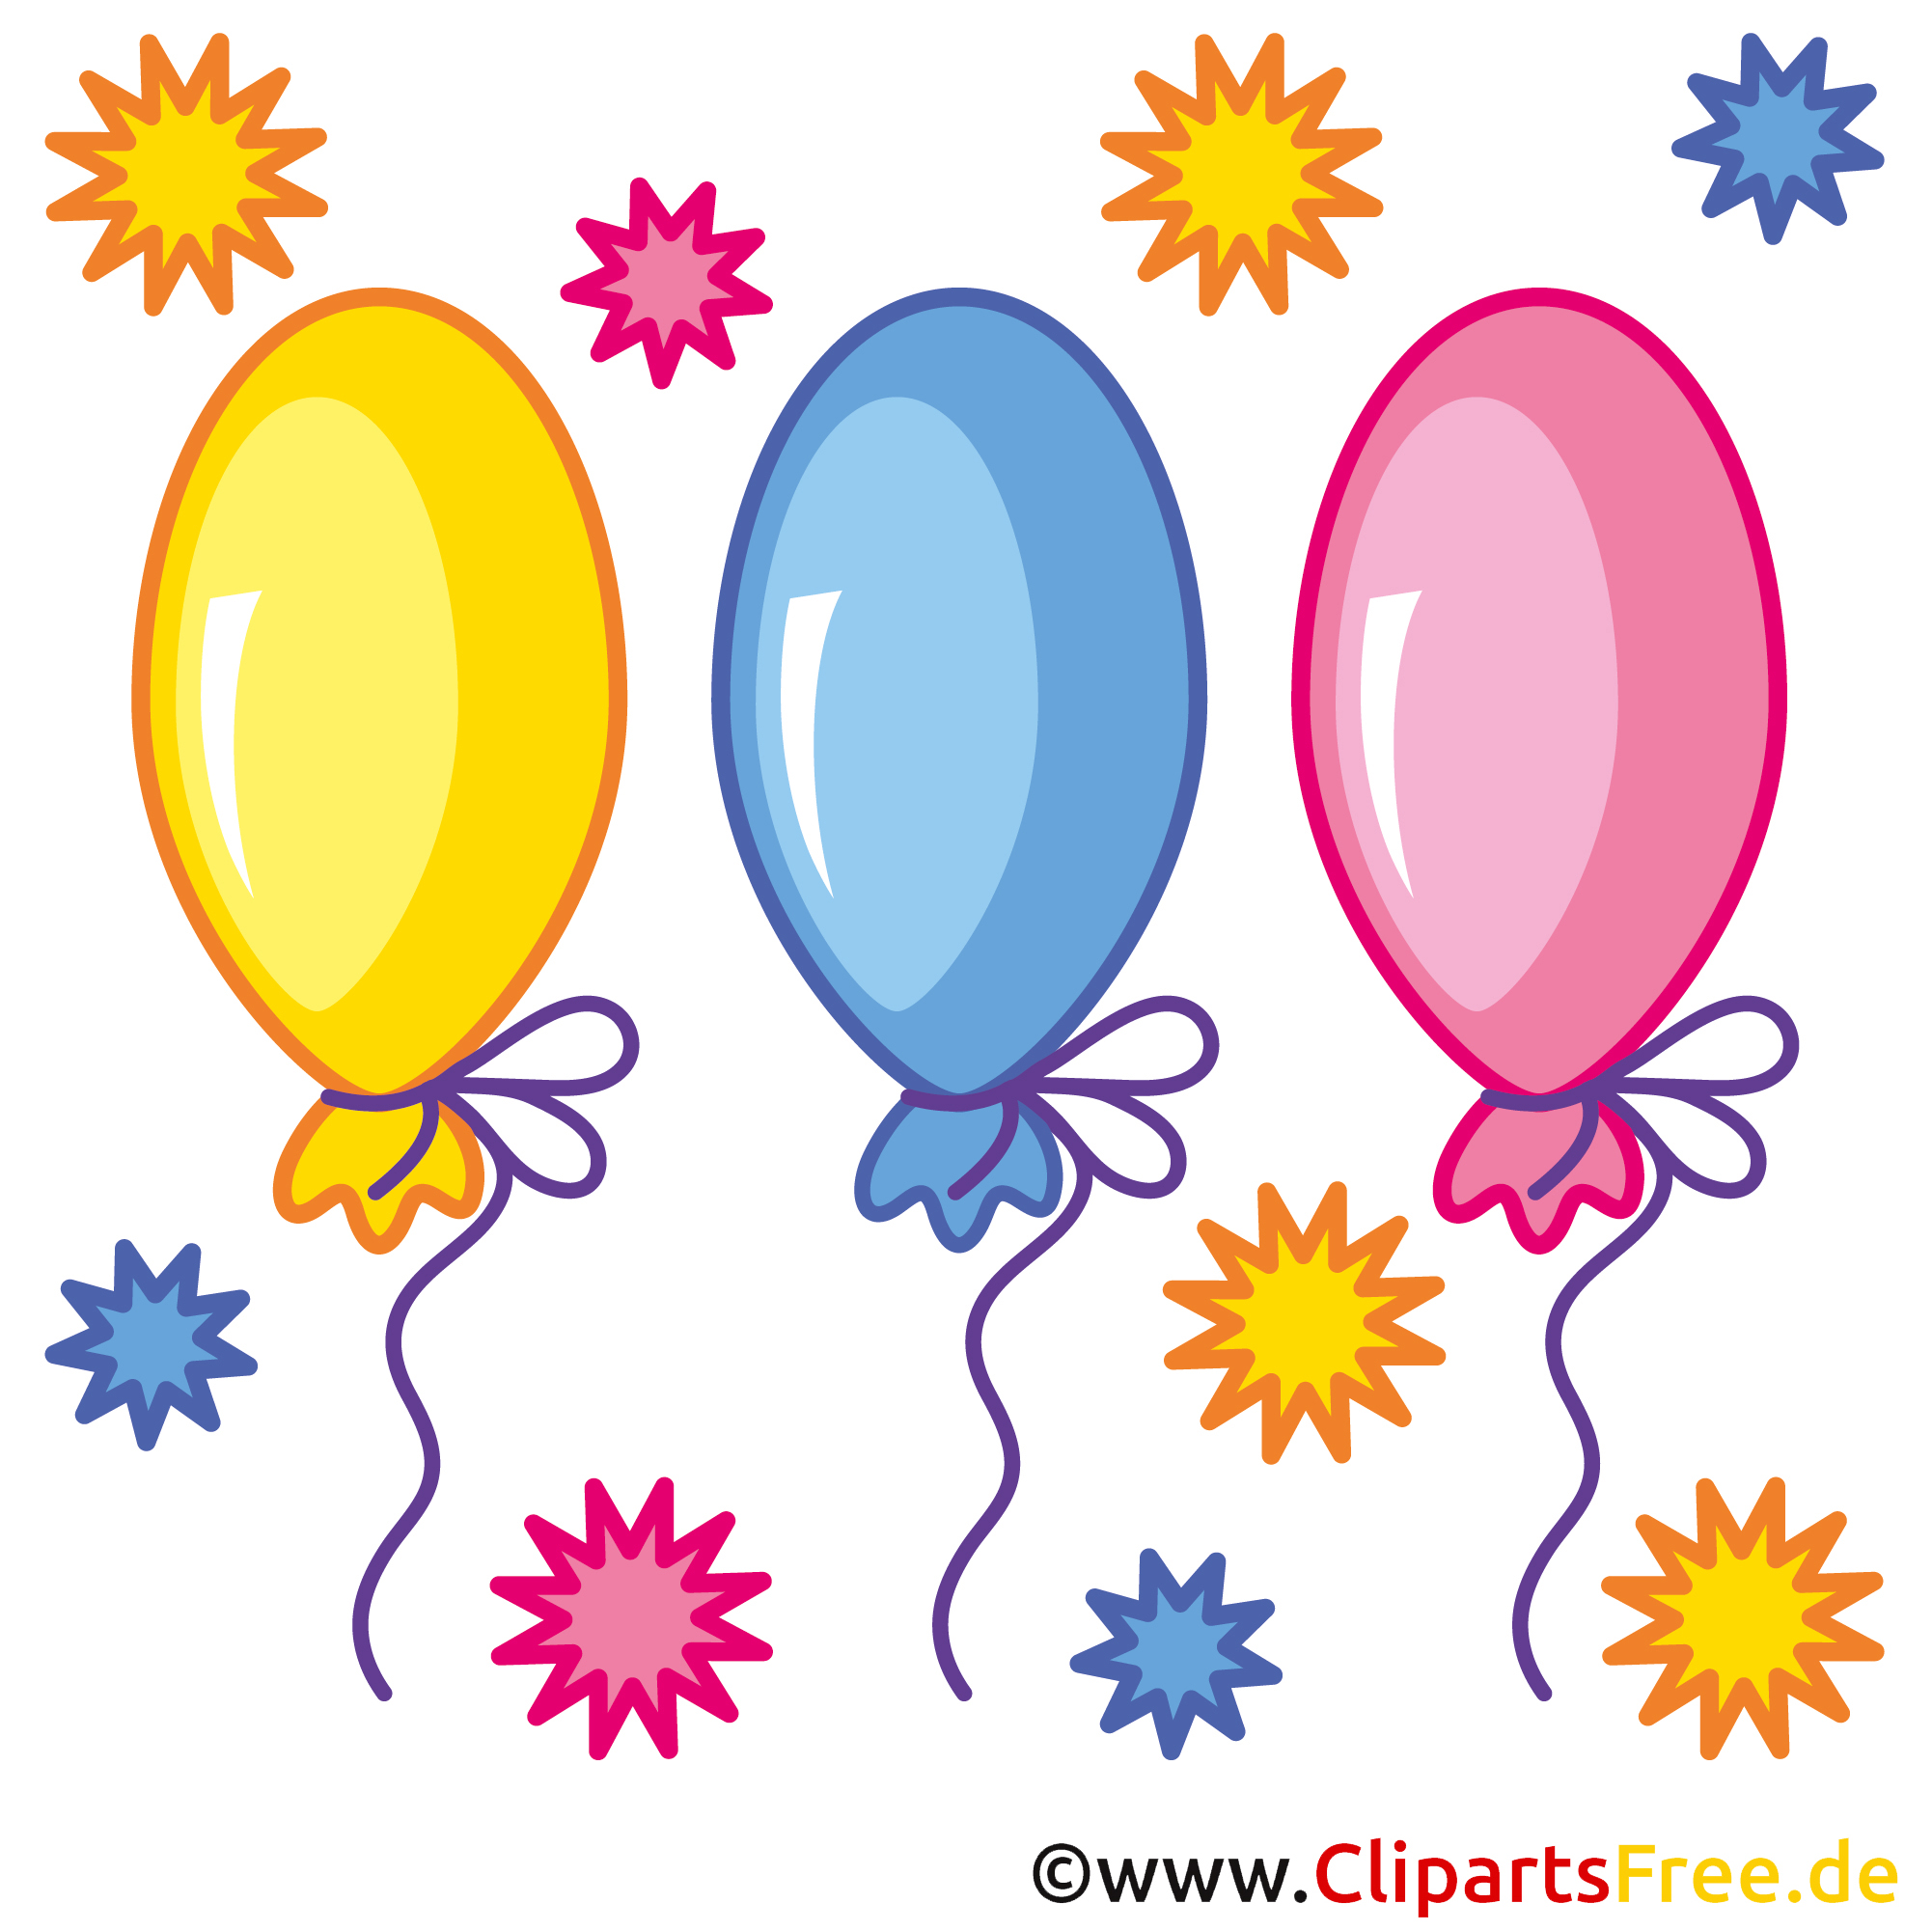 clipart gallery free download - photo #19